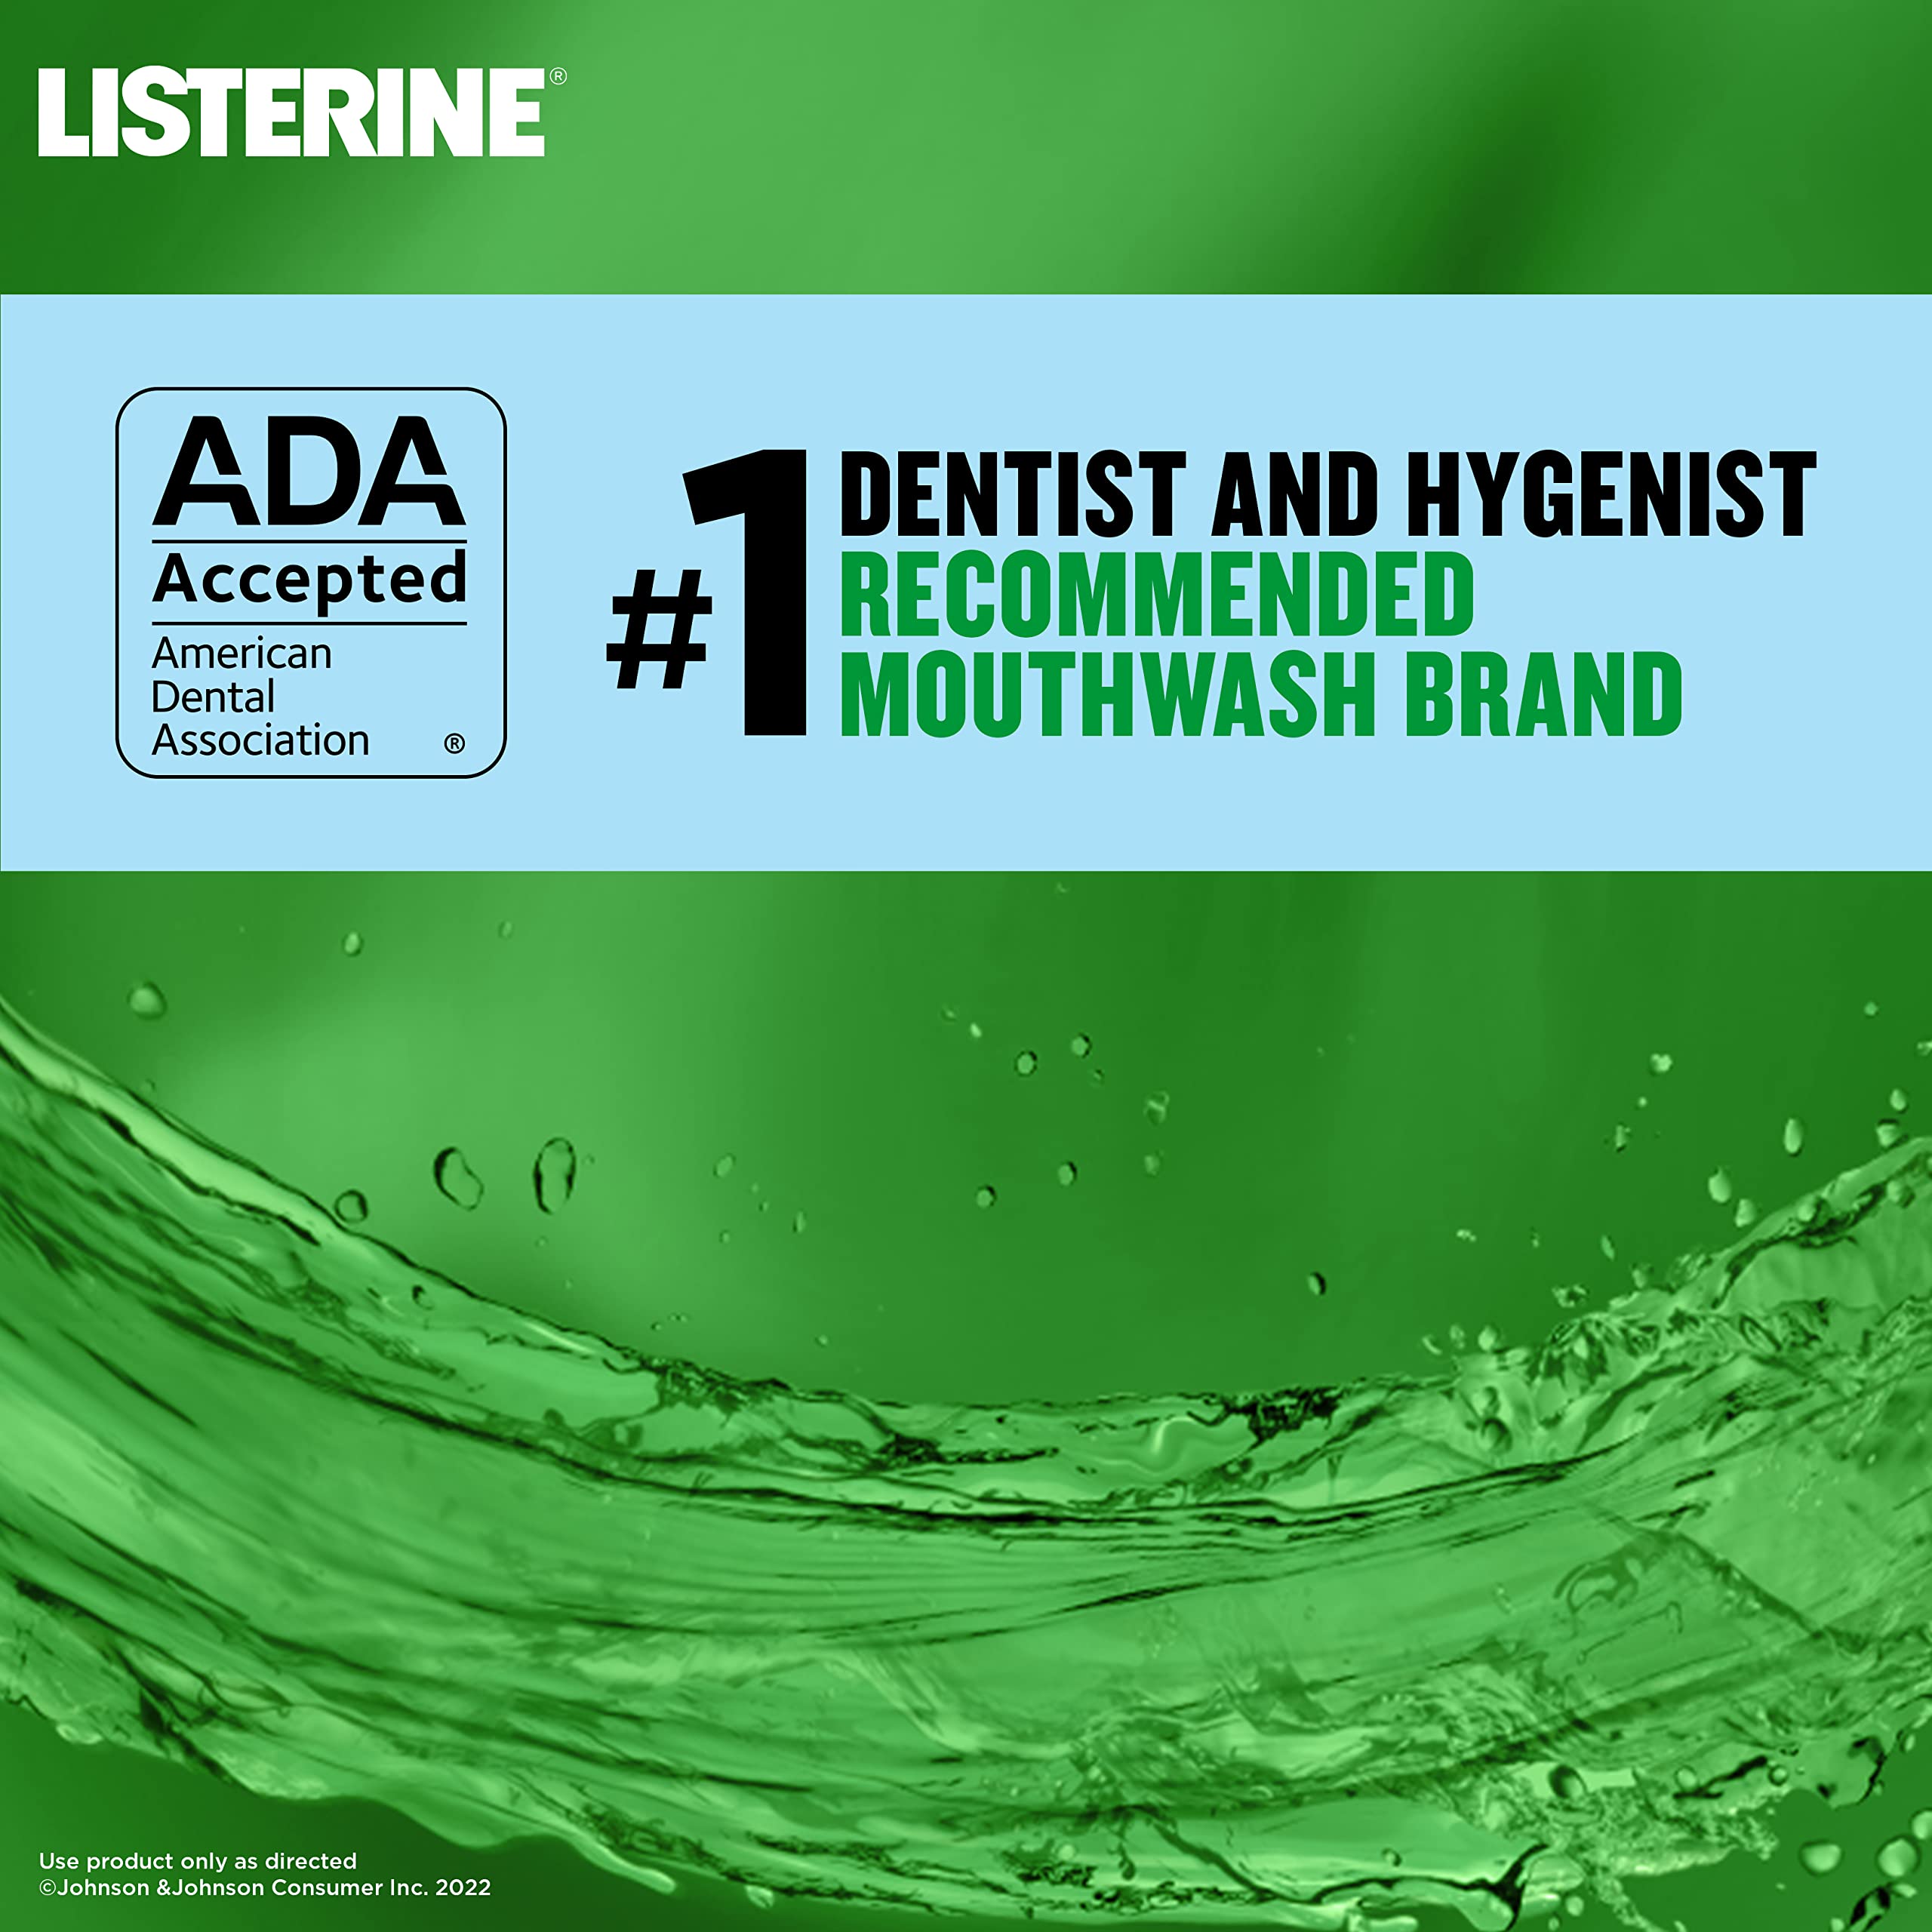 Listerine Smart Rinse Kids Alcohol-Free Anticavity Sodium Fluoride Mouthwash, ADA Accepted Oral Rinse for Dental Cavity Protection, Mint Shield Flavor, Convenience Pack, 2 x 500 mL